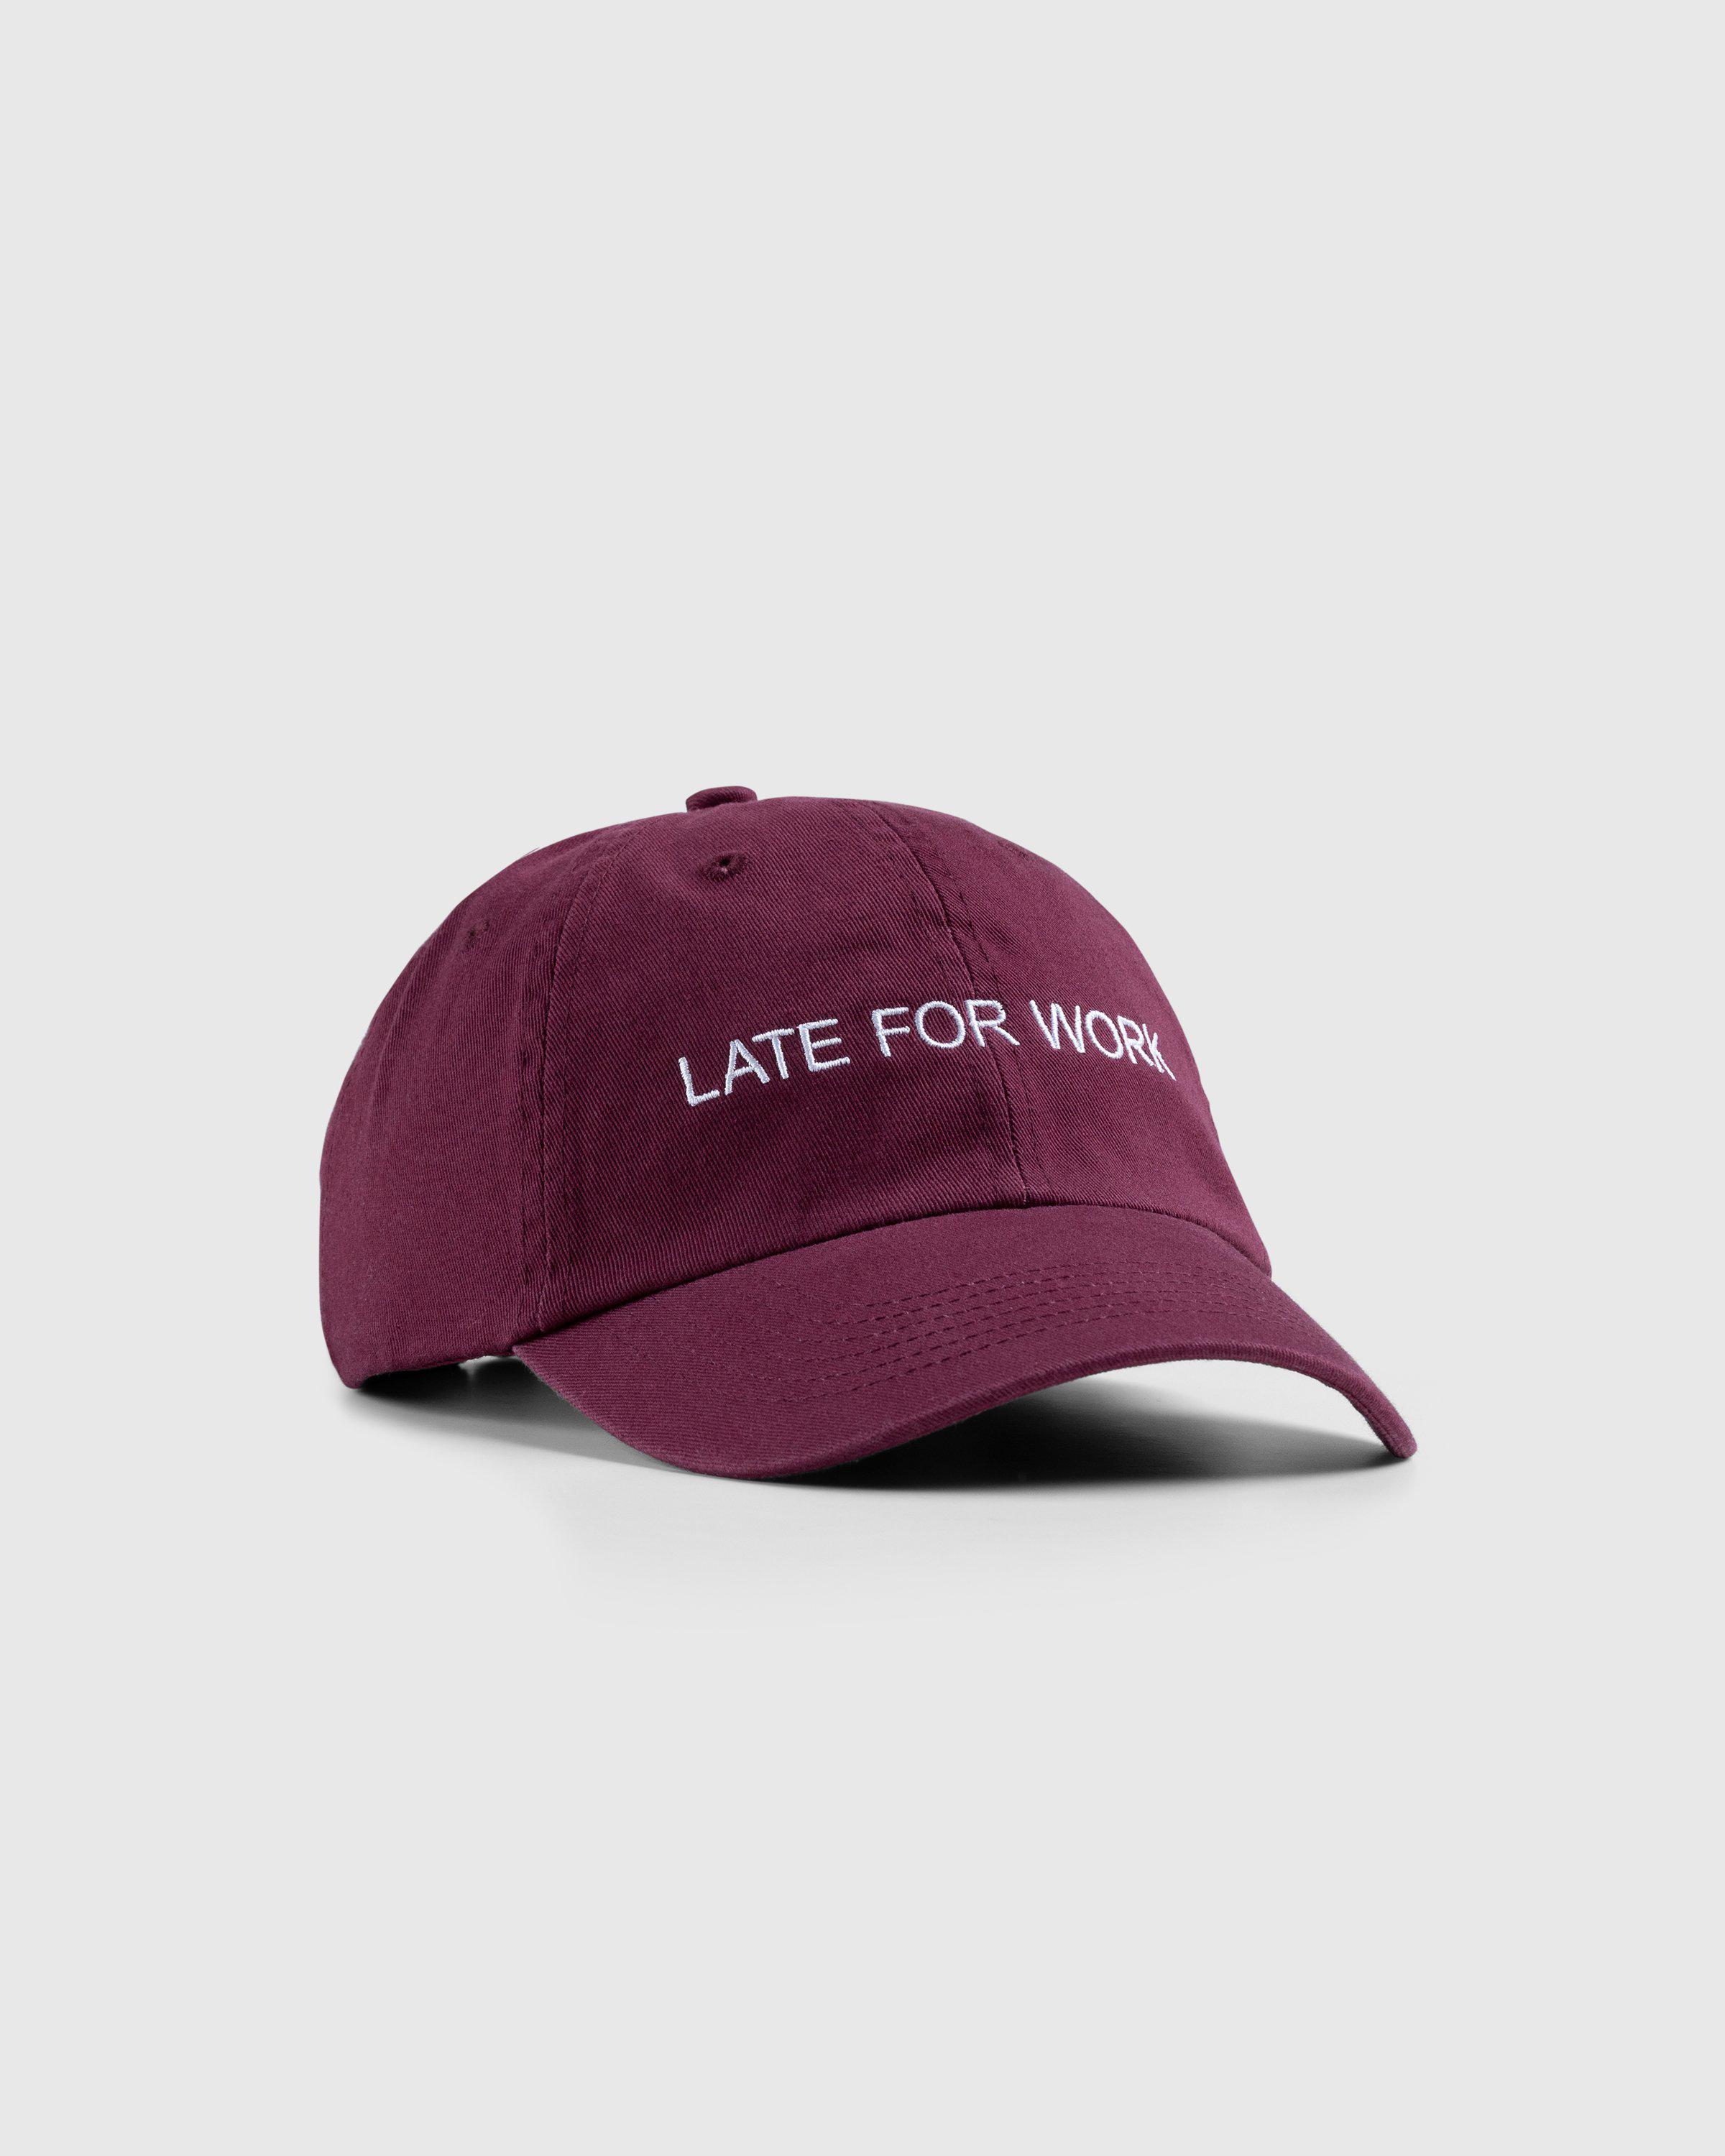 HO HO COCO – Late For Work Cap Red by HO HO COCO